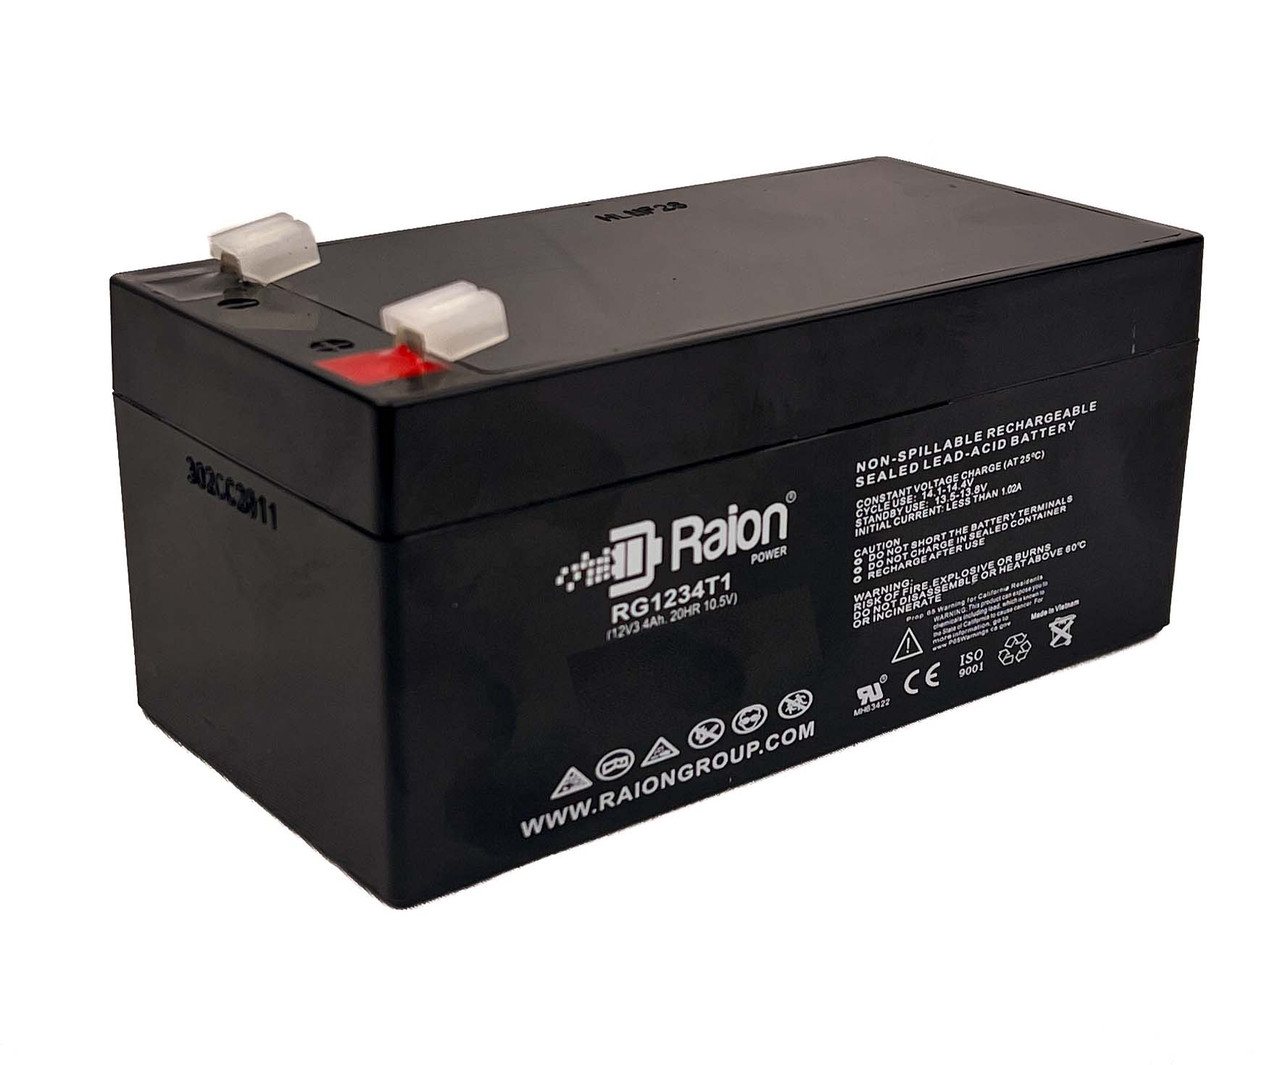 Raion Power 12V 3.4Ah Non-Spillable Replacement Battery for Ohio Medical Care-e-vac II Portable Suction